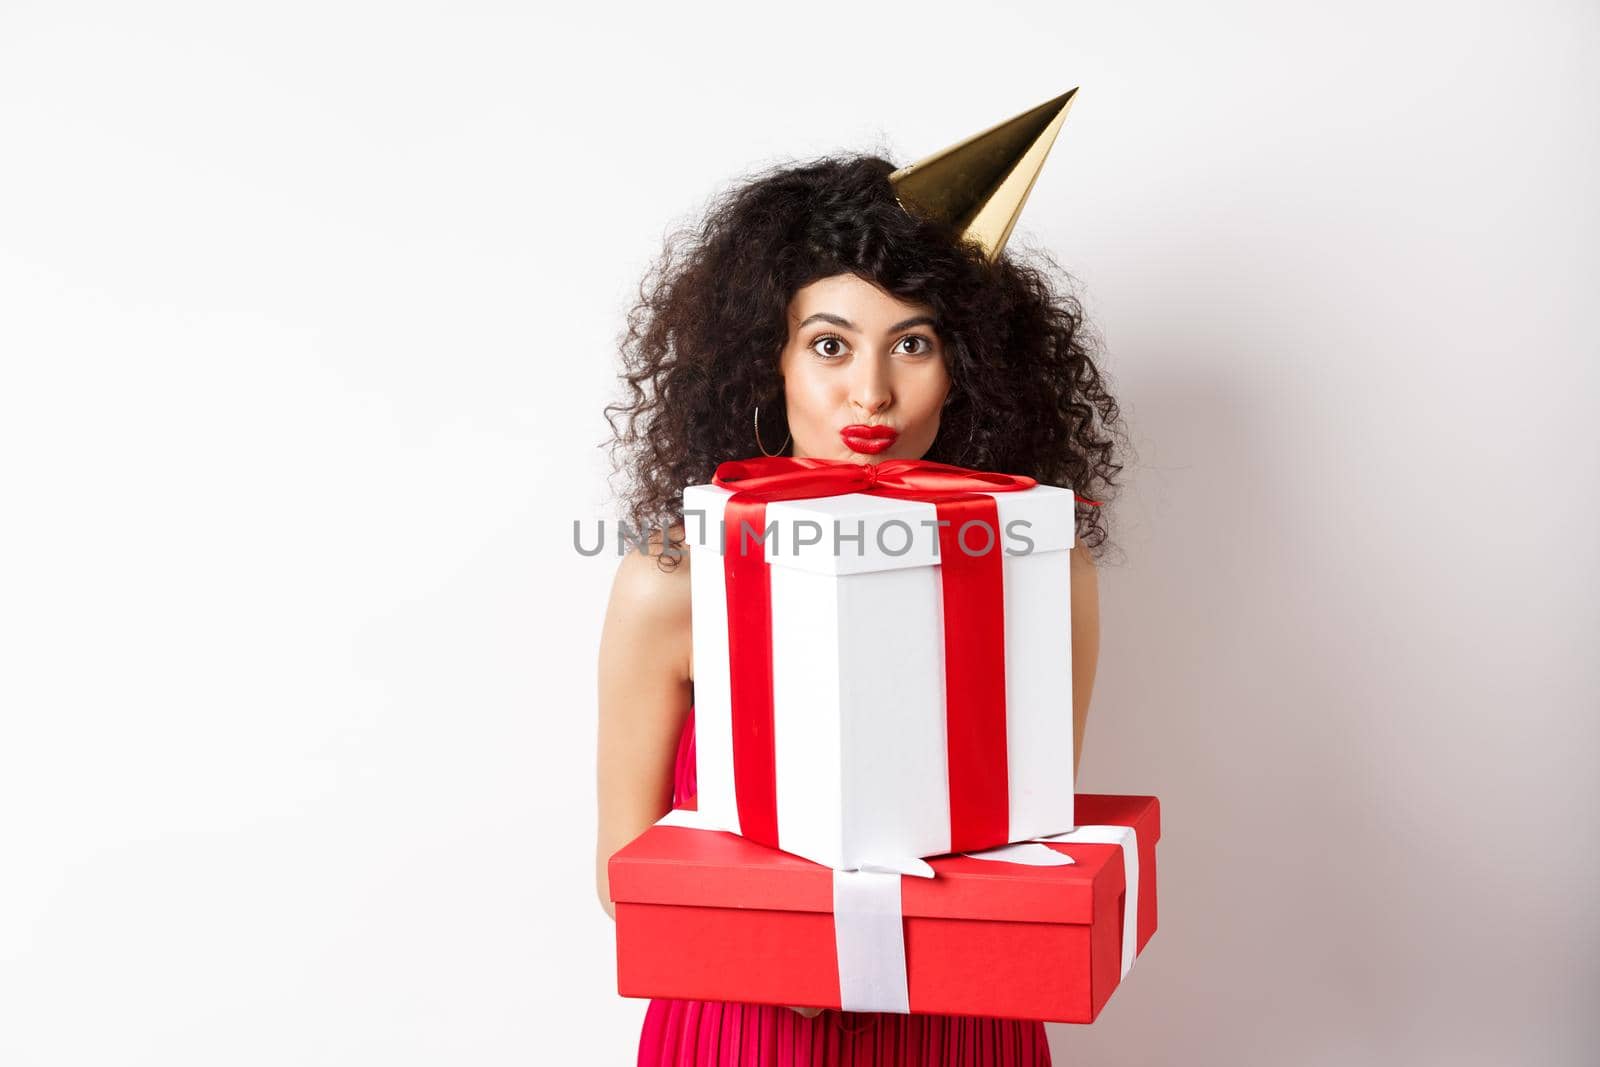 Cute birthday girl with curly hair and party hat, holding gifts and looking happy at camera, standing against white background.